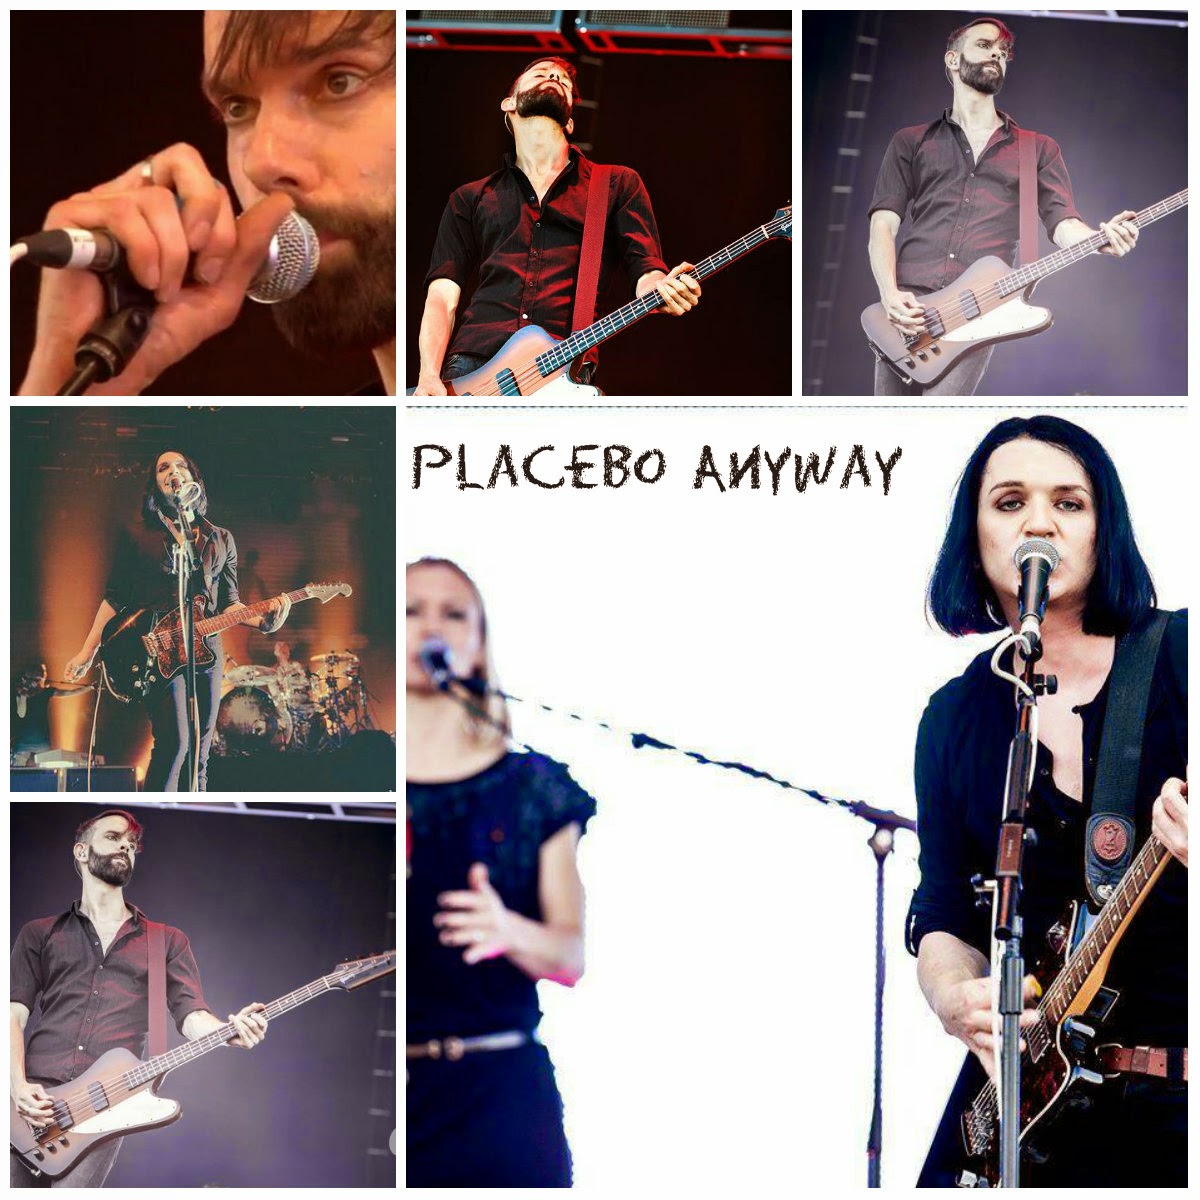 Placebo Anyway Blog : Meeting Brian Molko (Placebo) at the Rock Werchter  Festival 2014 – Interview with soulmate Ellen VG from Belgium